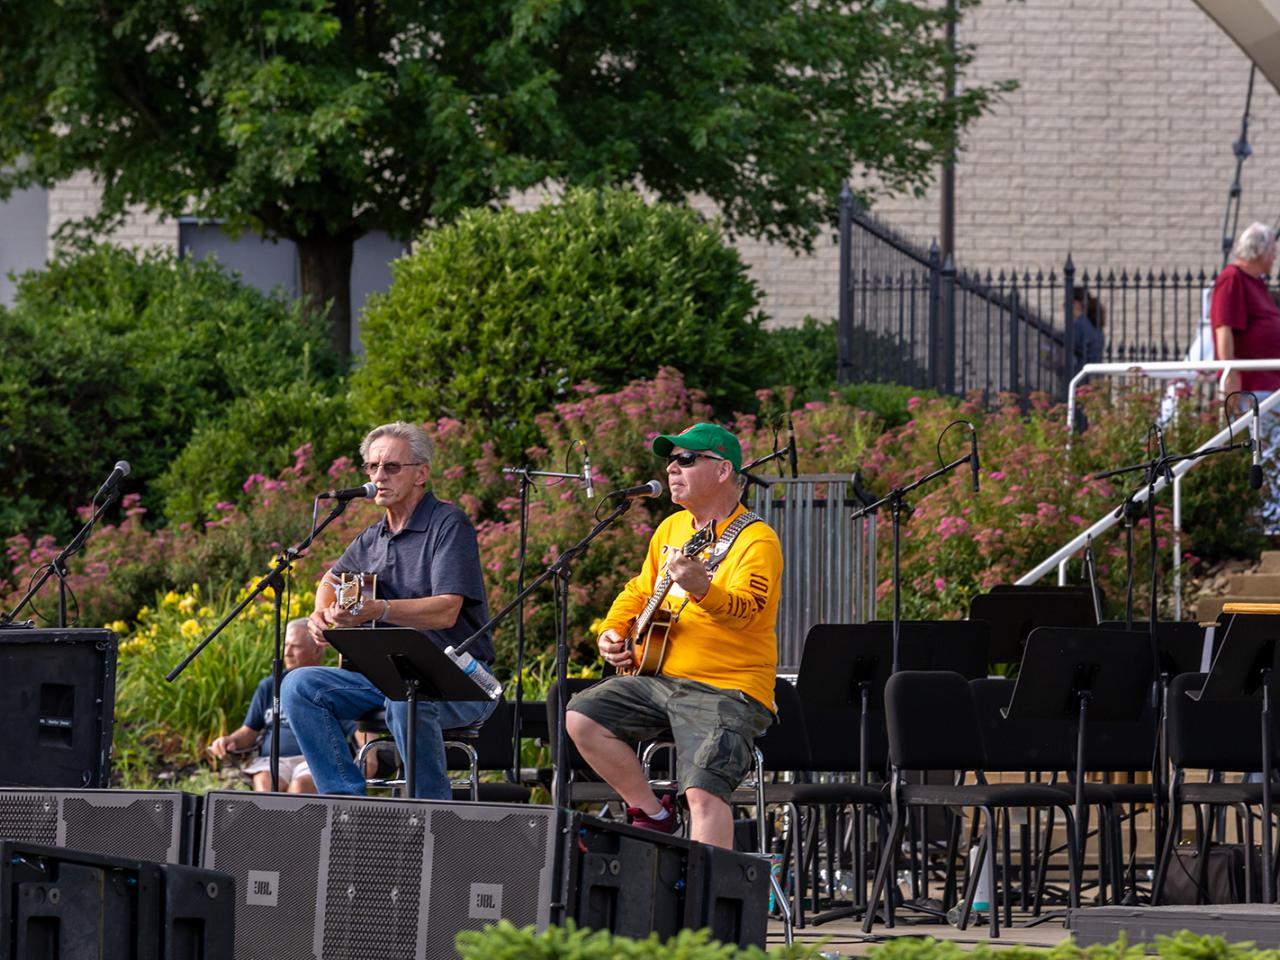 The two-man band Sticks & Stones play guitars and sing under the Martha Grace Reese Amphitheatre.  